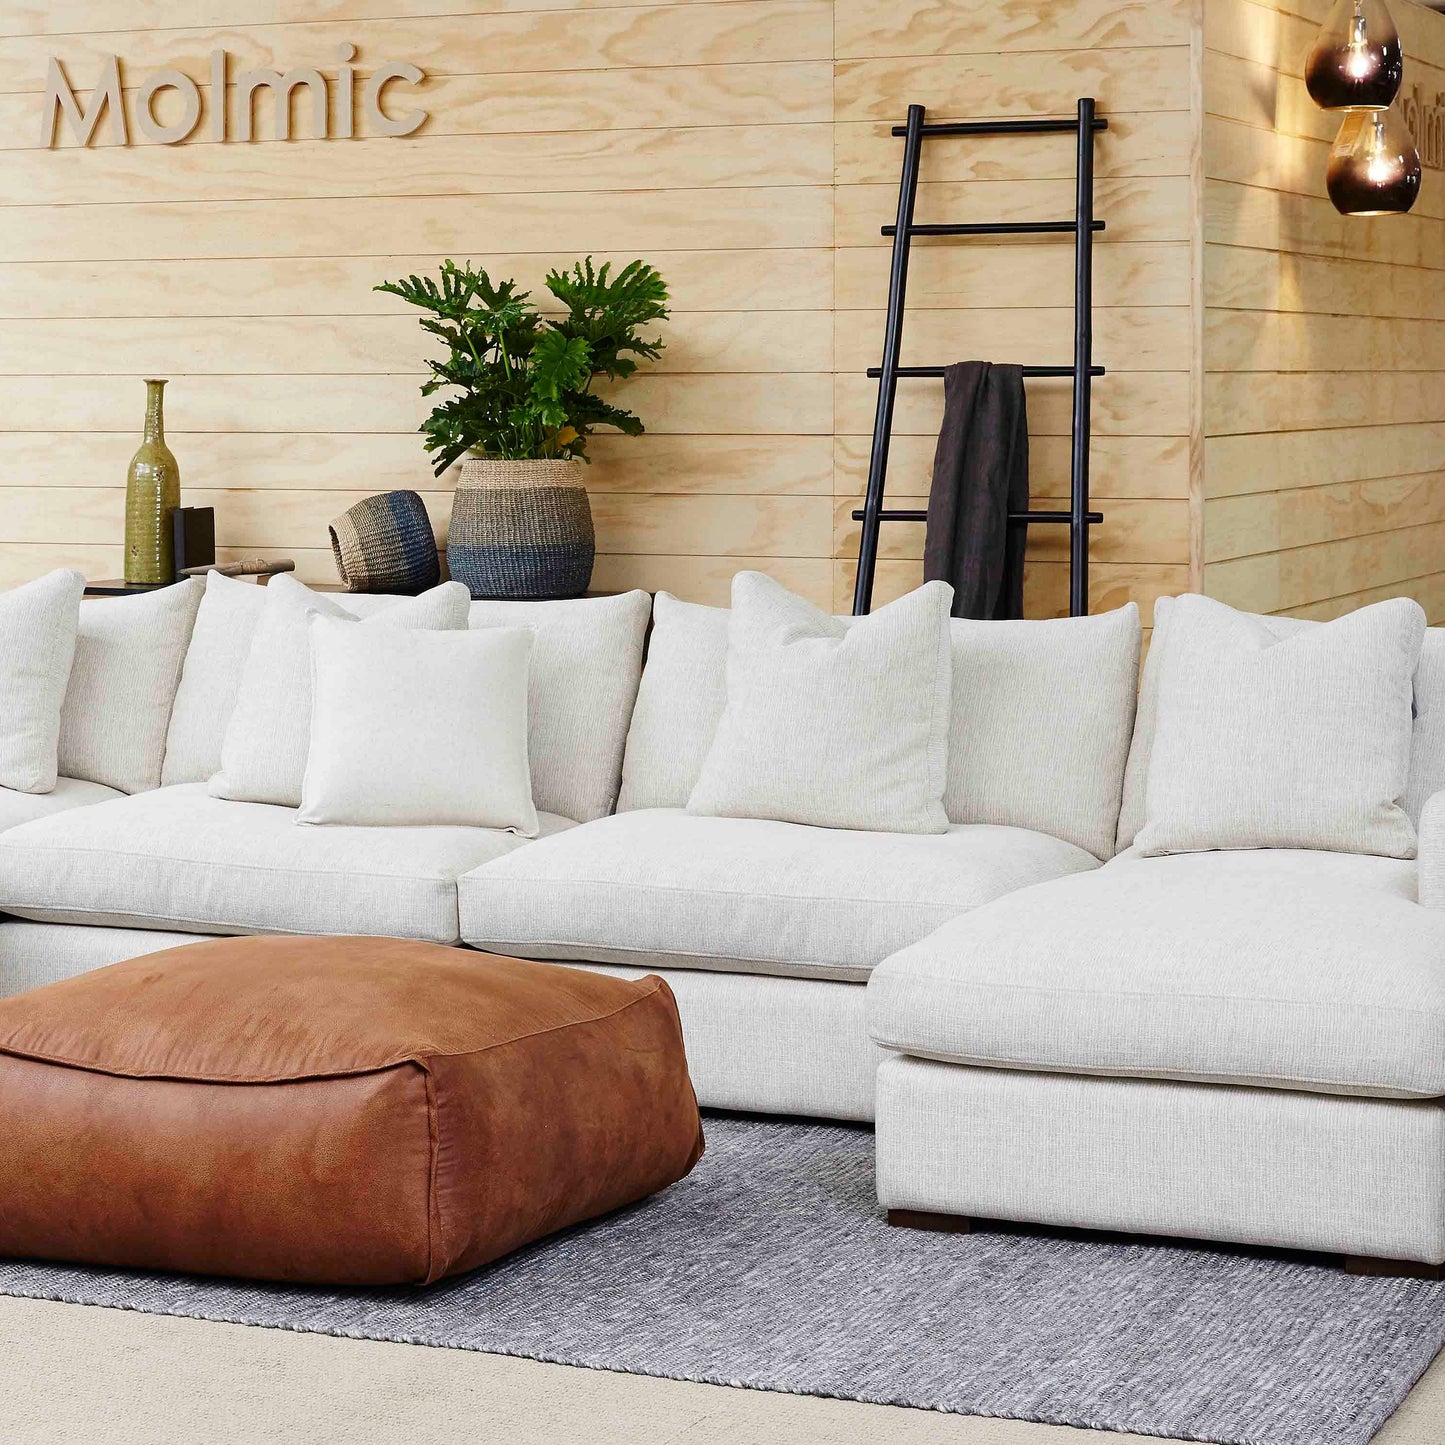 Shona Modular Sofa by Molmic available from Make Your House A Home, Furniture Store located in Bendigo, Victoria. Australian Made in Melbourne. Momic Feather Blend.